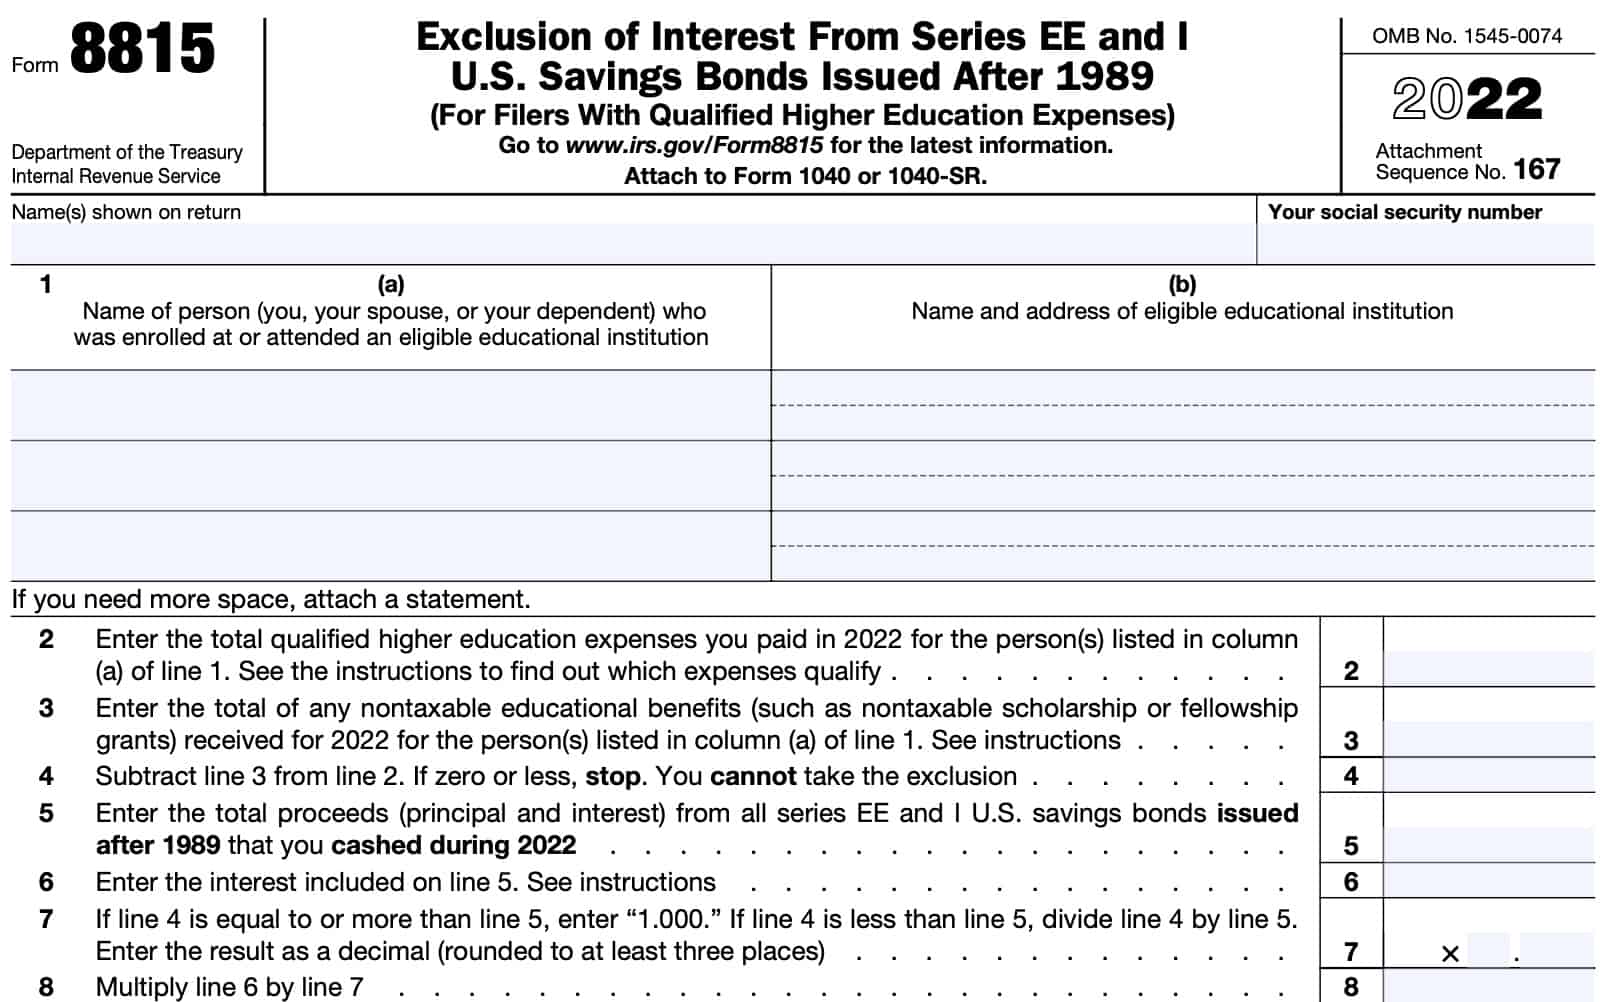 irs form 8815, lines 1-8